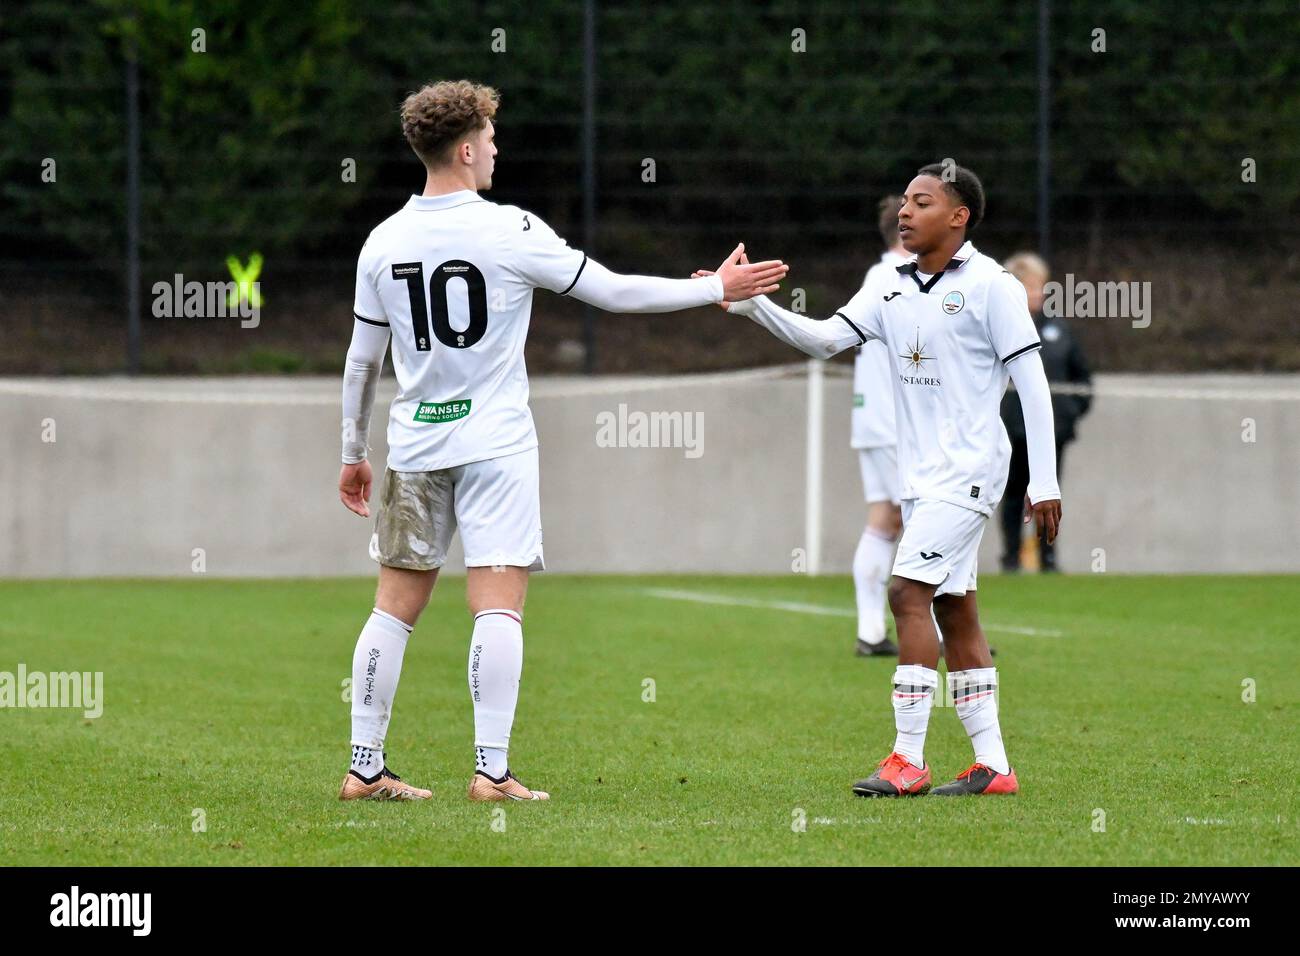 Swansea, Wales. 4 February 2023. Iwan Morgan of Swansea City high fives  Aimar Govea of Swansea City during the Professional Development League game  between Swansea City Under 18 and Millwall Under 18